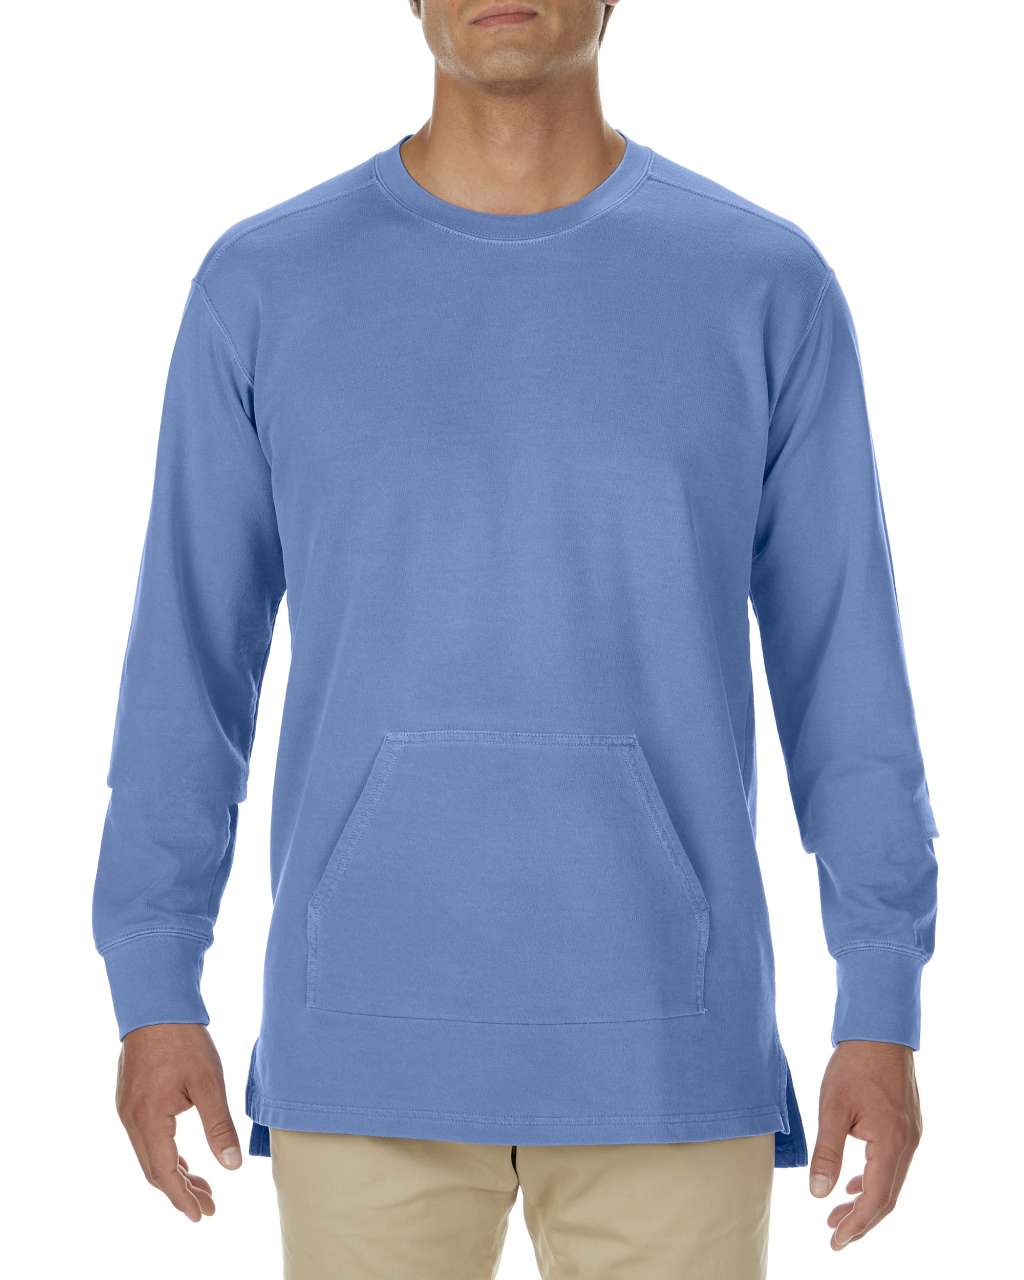 Promo  ADULT FRENCH TERRY CREWNECK